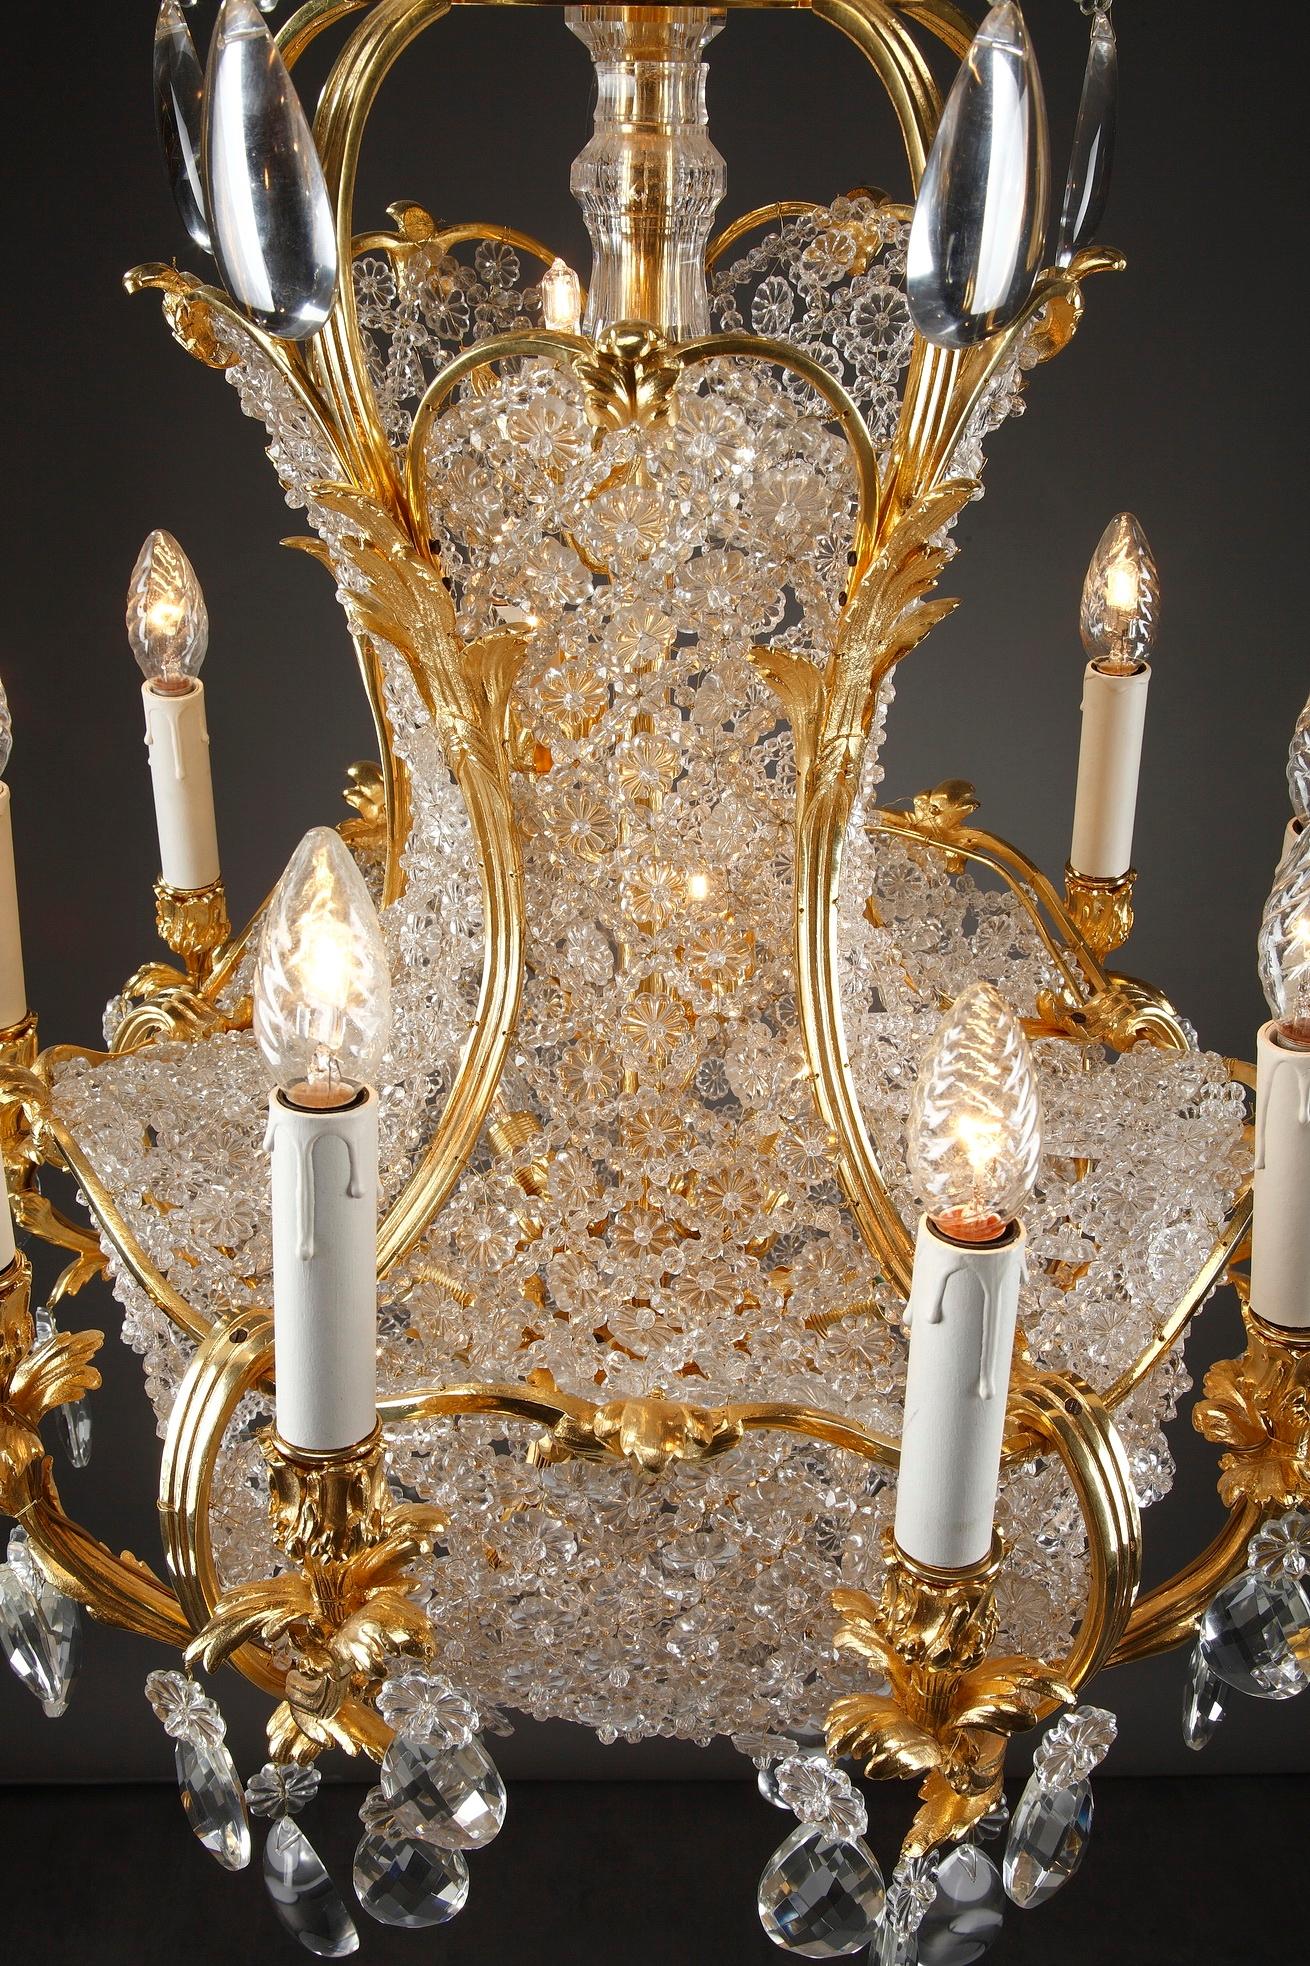 19th Century 10-Light Ormolu and Crystal Basket-Shaped Chandelier For Sale 7